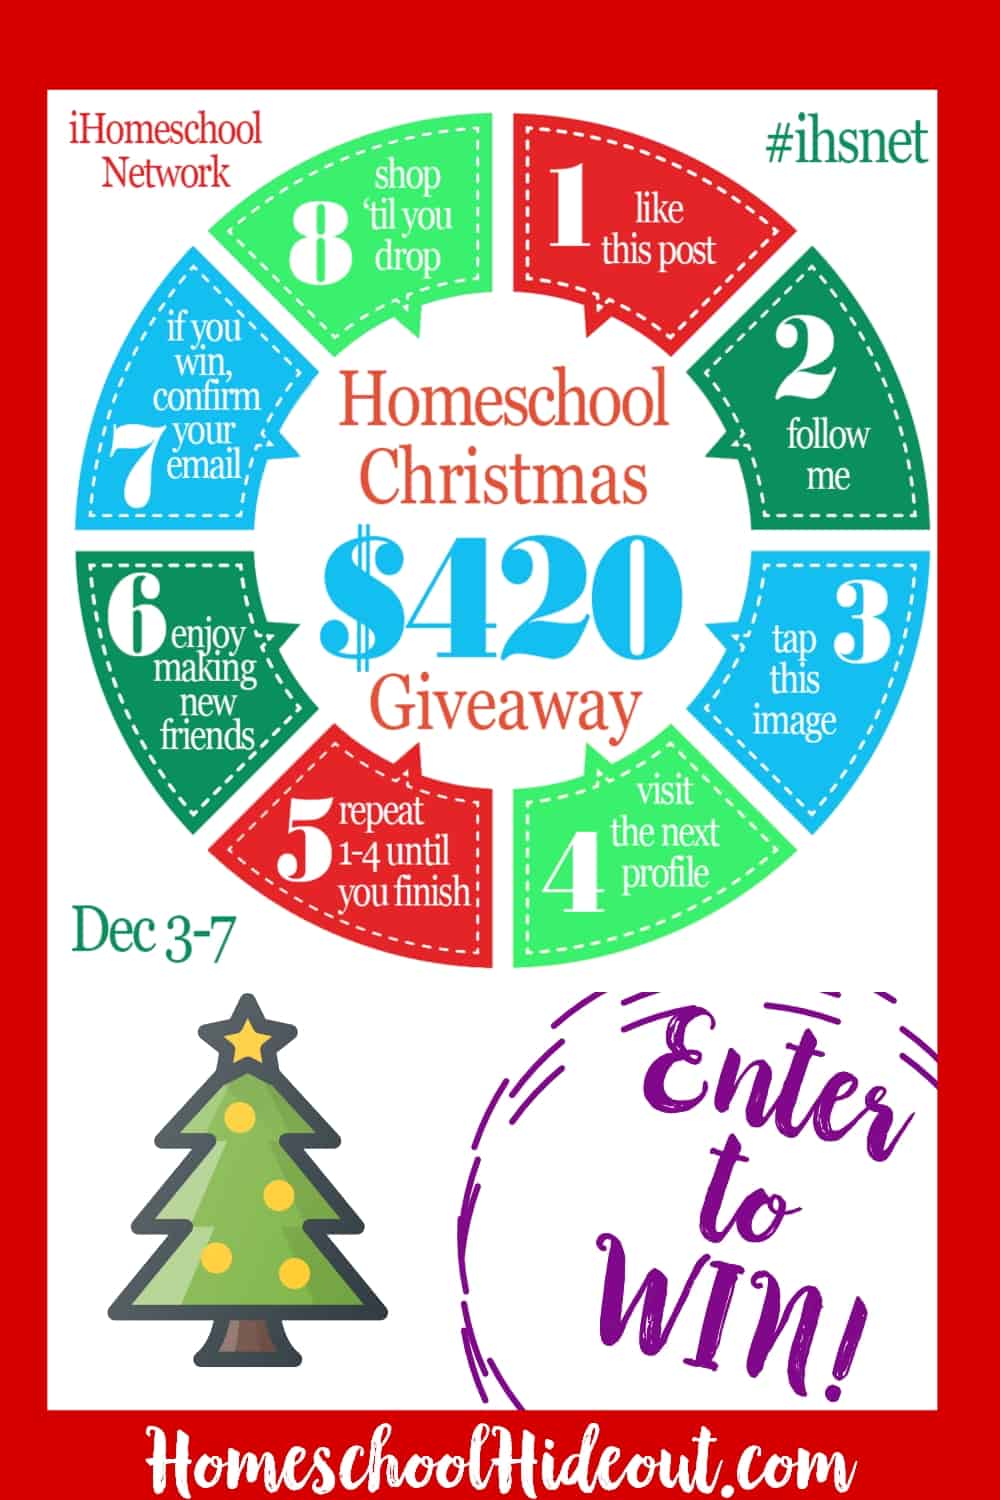 Enter to win a $420 cash prize from your favorite homeschool bloggers! Head to Instagram to enter! #cashgiveaway #giveaway #christmas #ihn